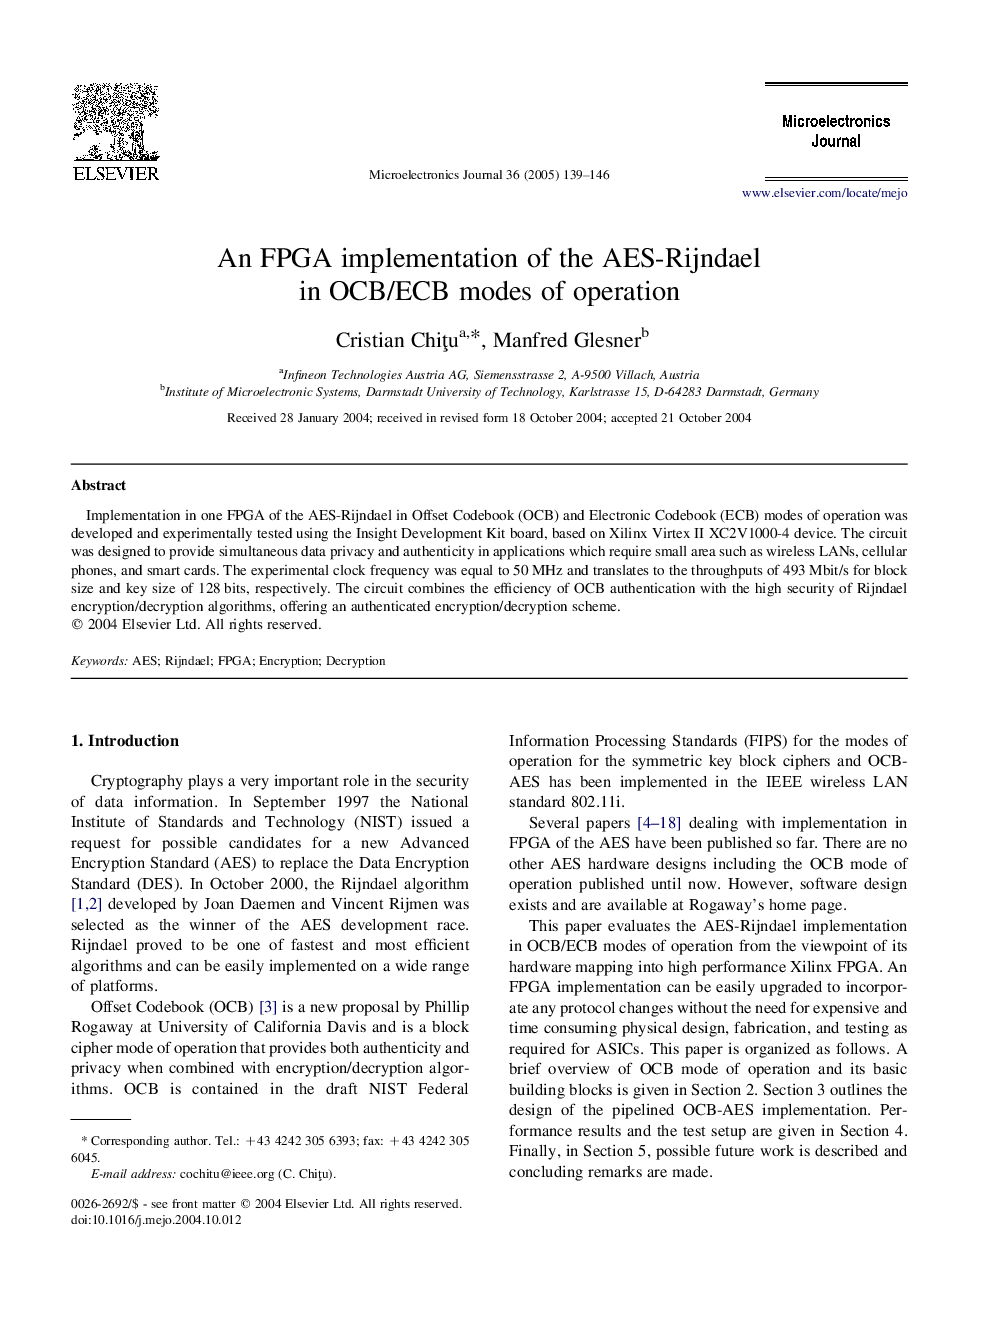 An FPGA implementation of the AES-Rijndael in OCB/ECB modes of operation